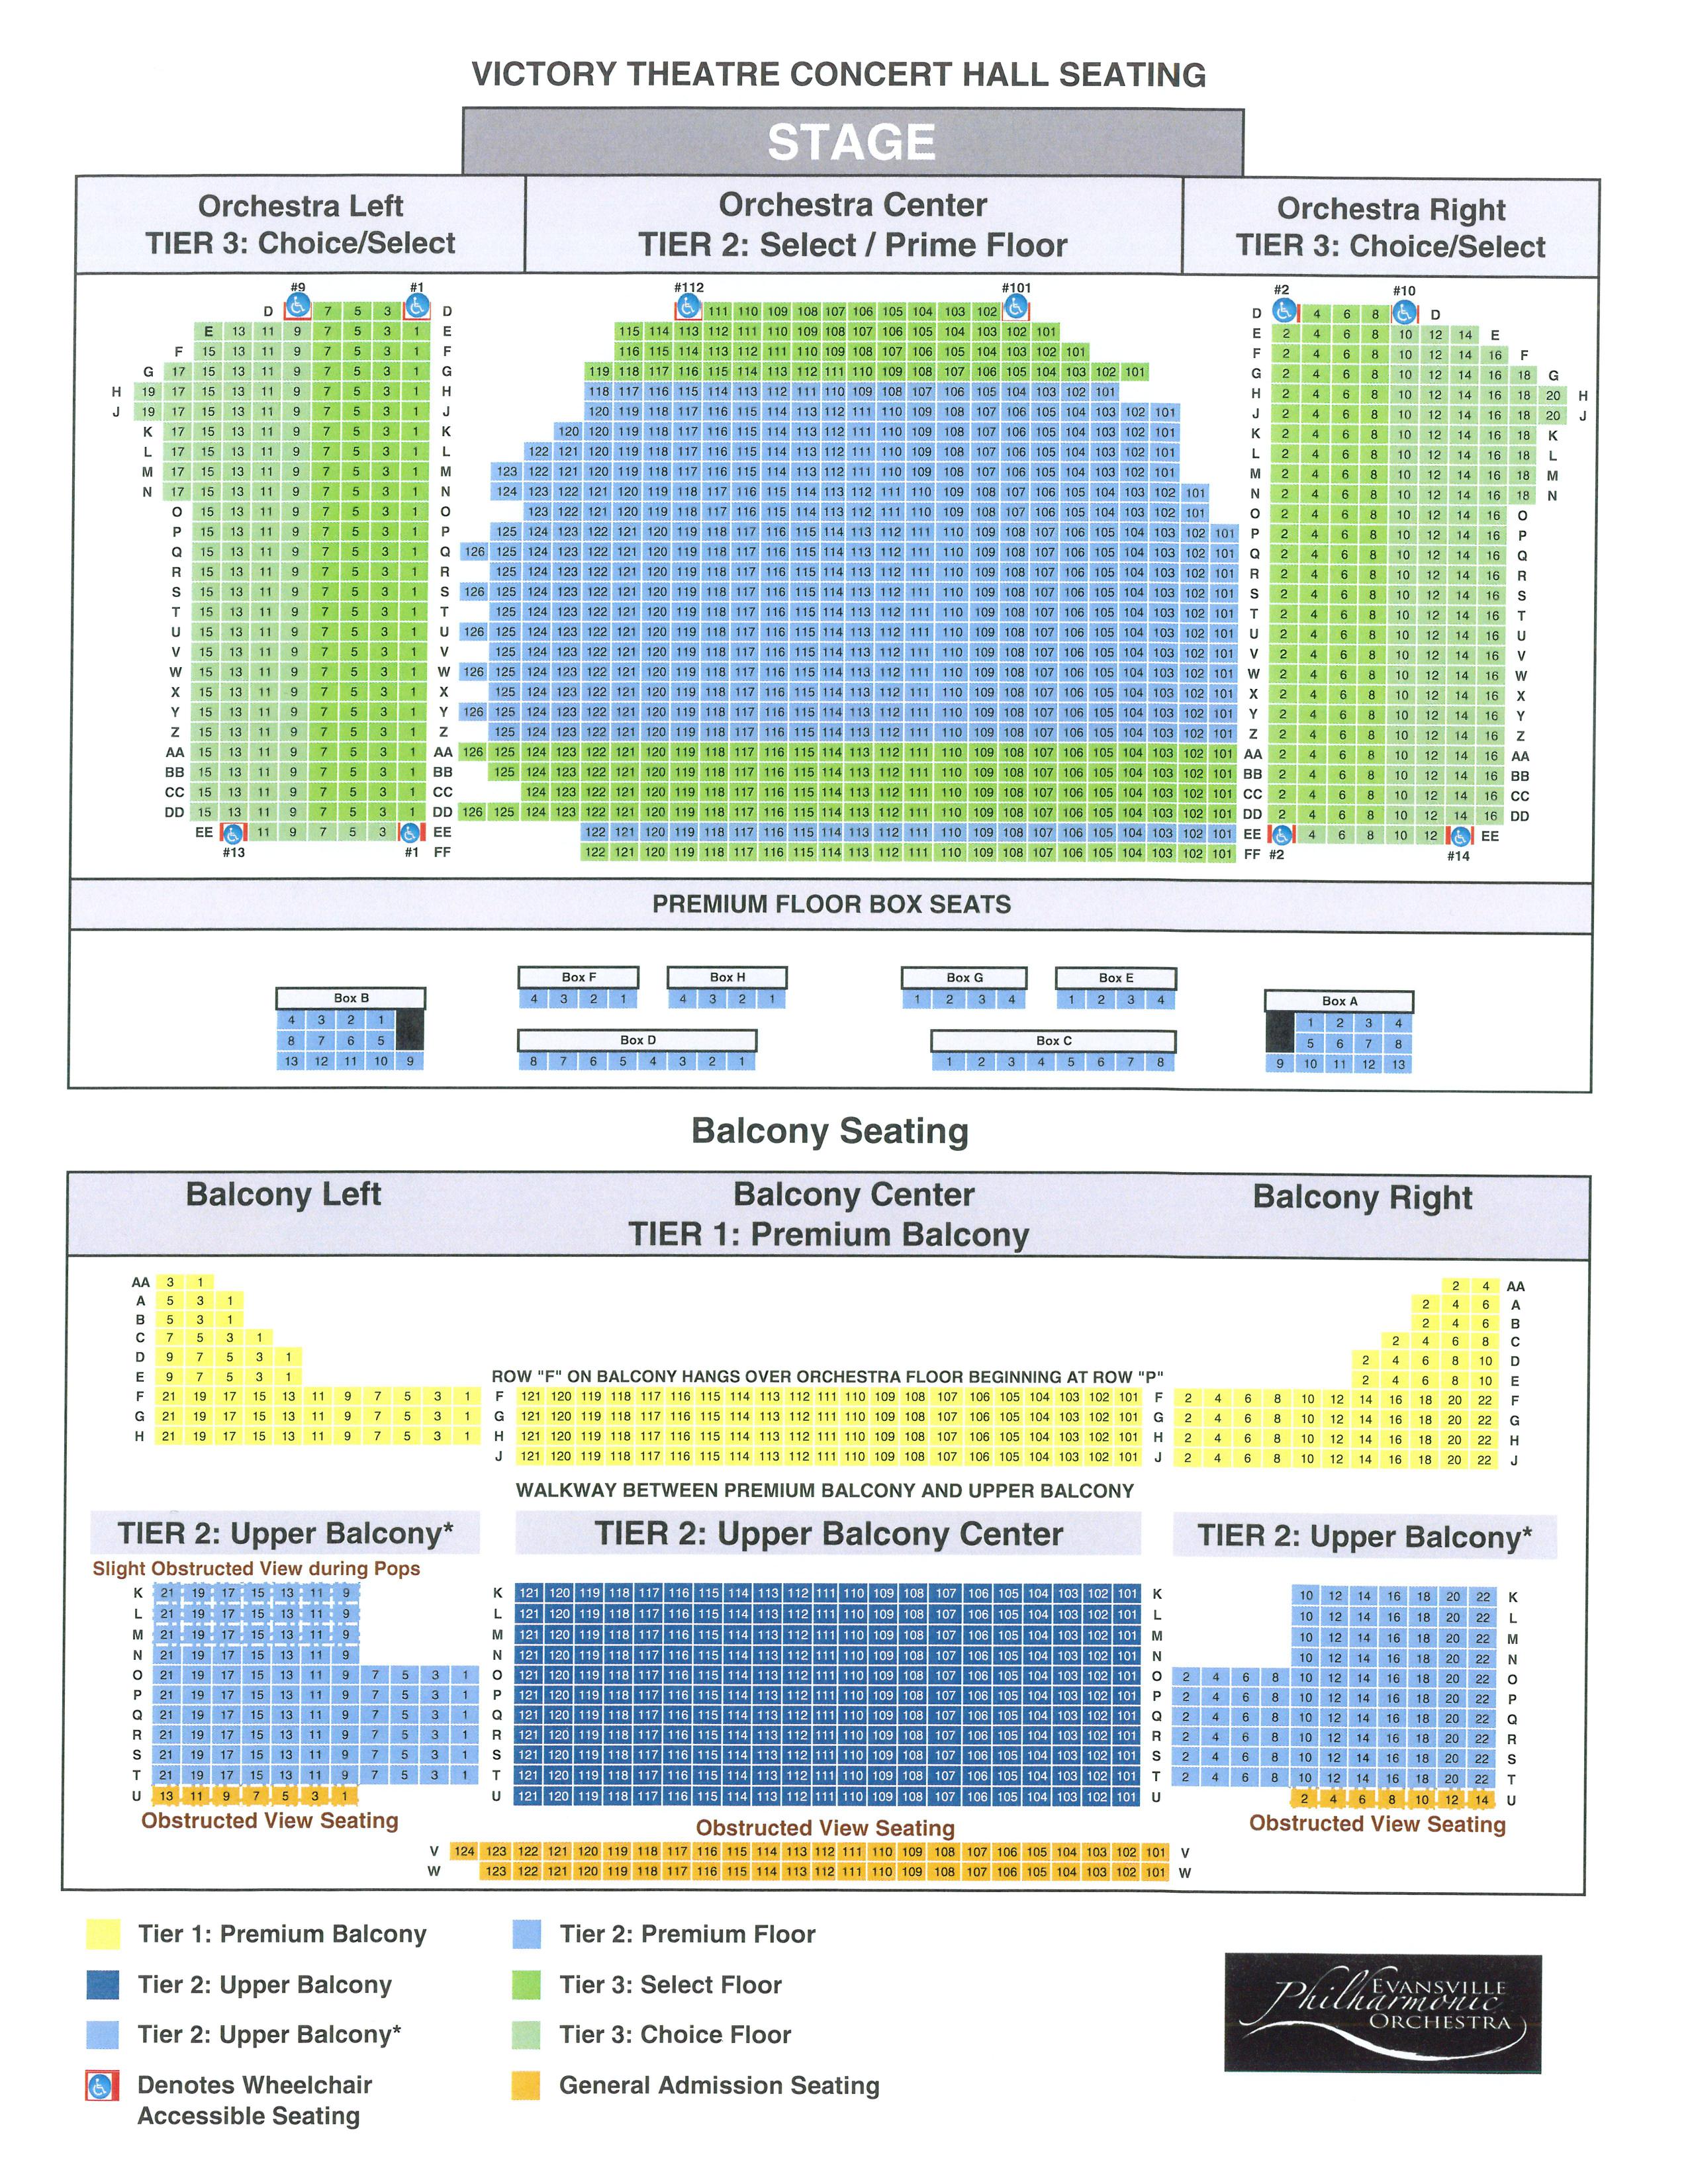 Seating Chart | Evansville Philharmonic Orchestral Corporation